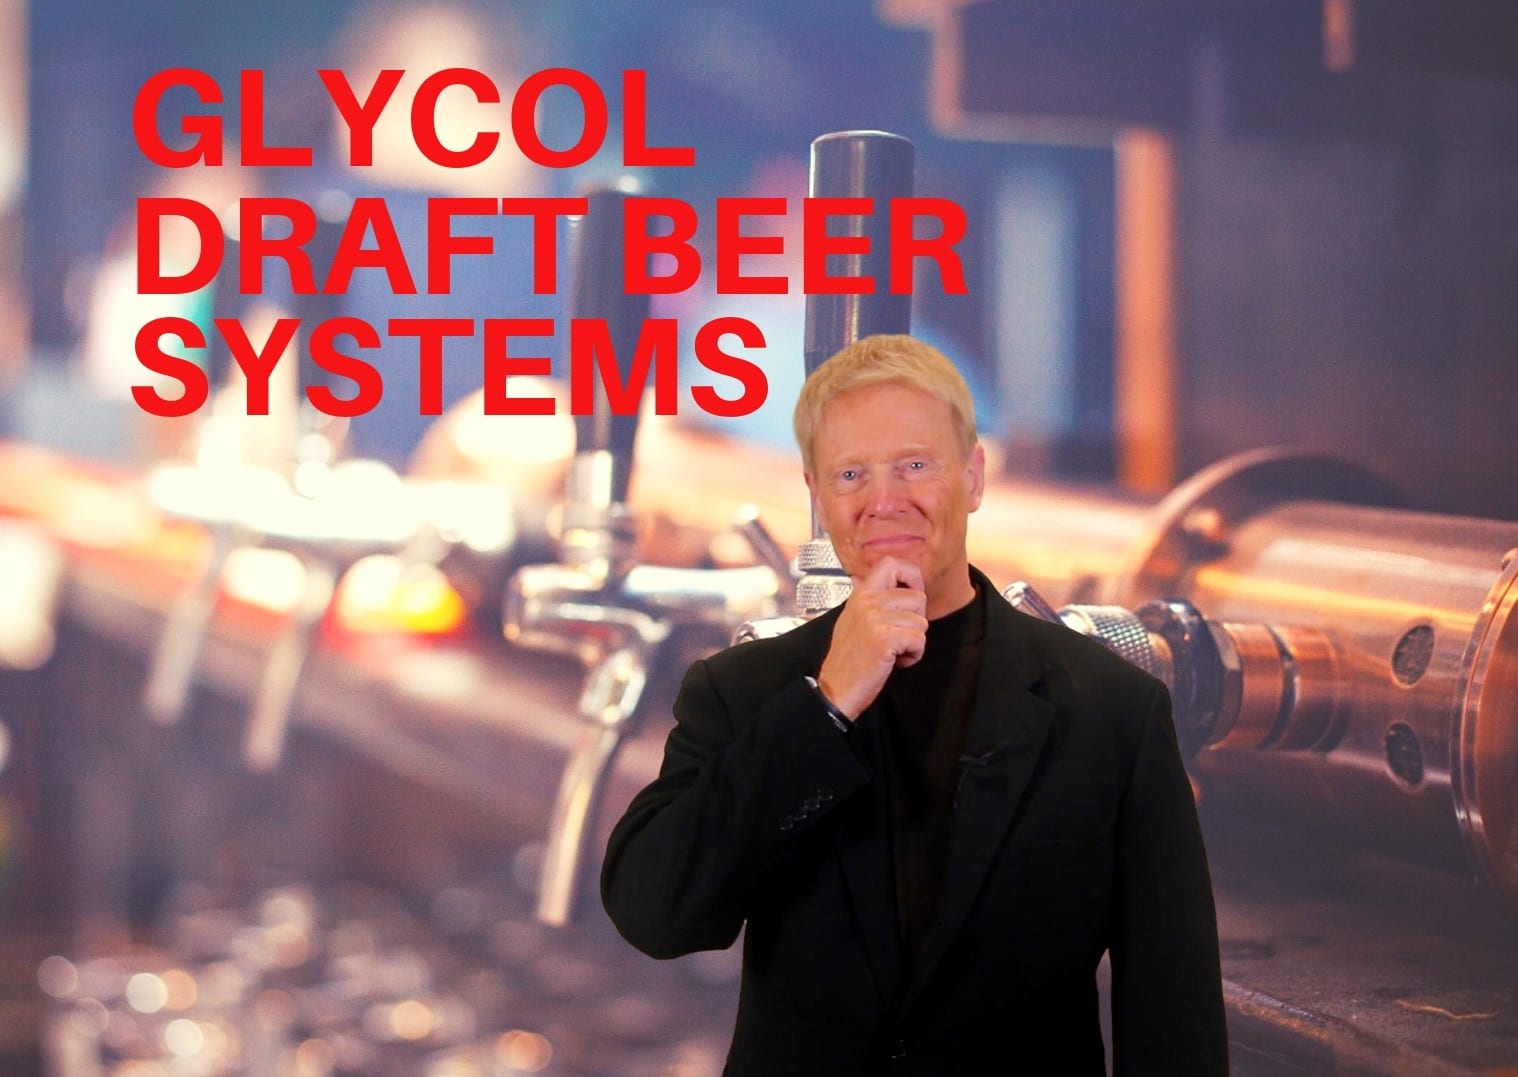 Glycol beer systems